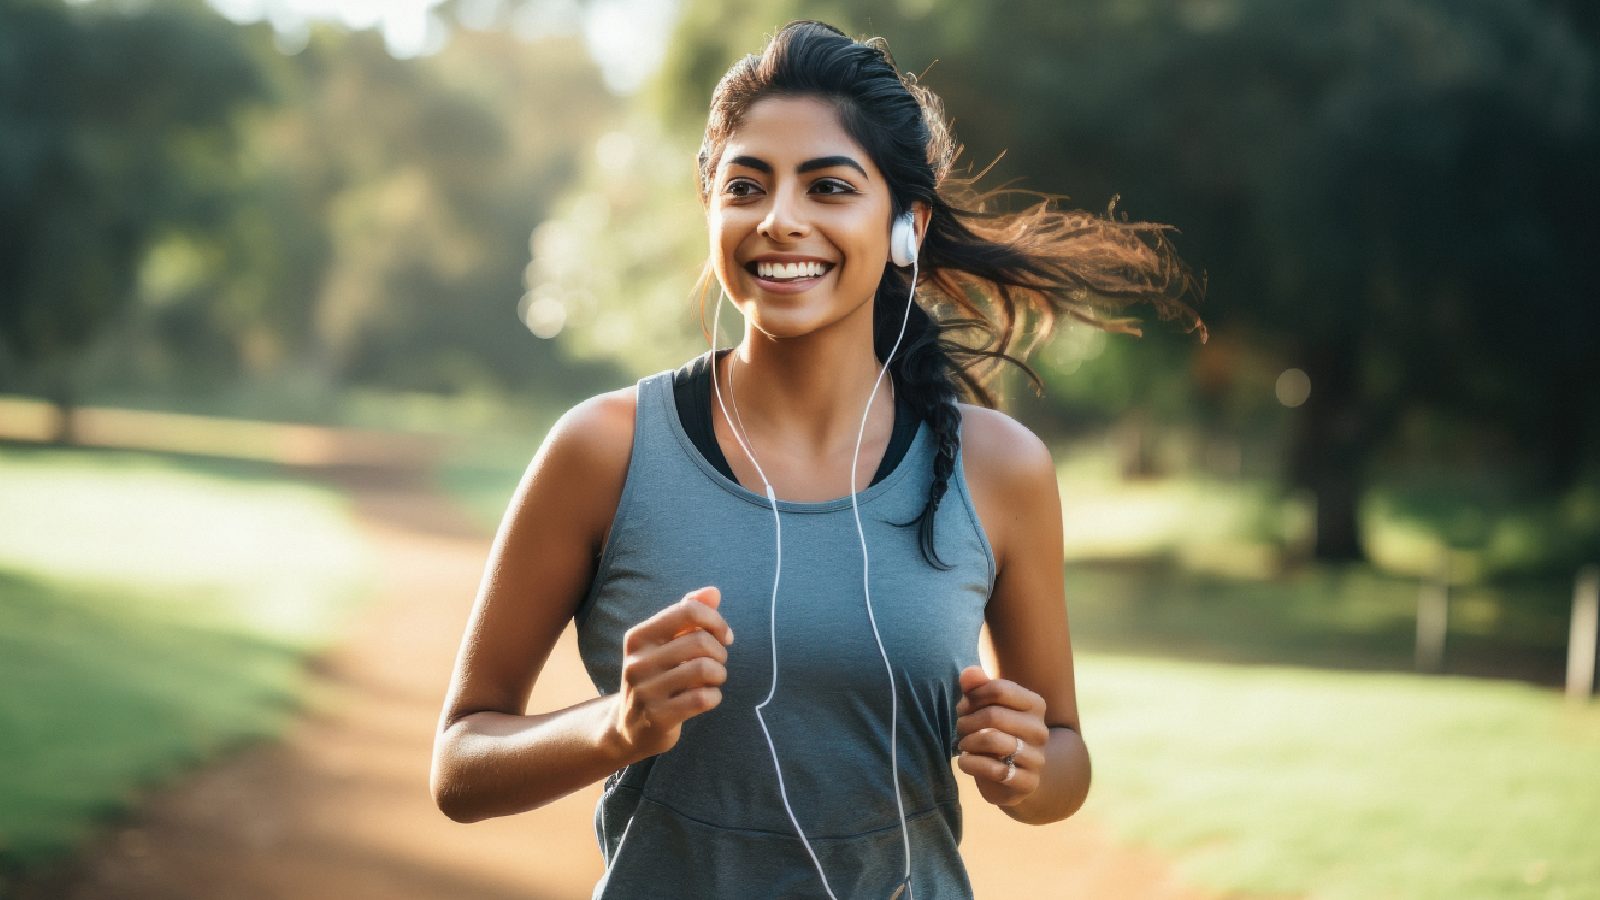 Can listening to music while exercising improve your workout?